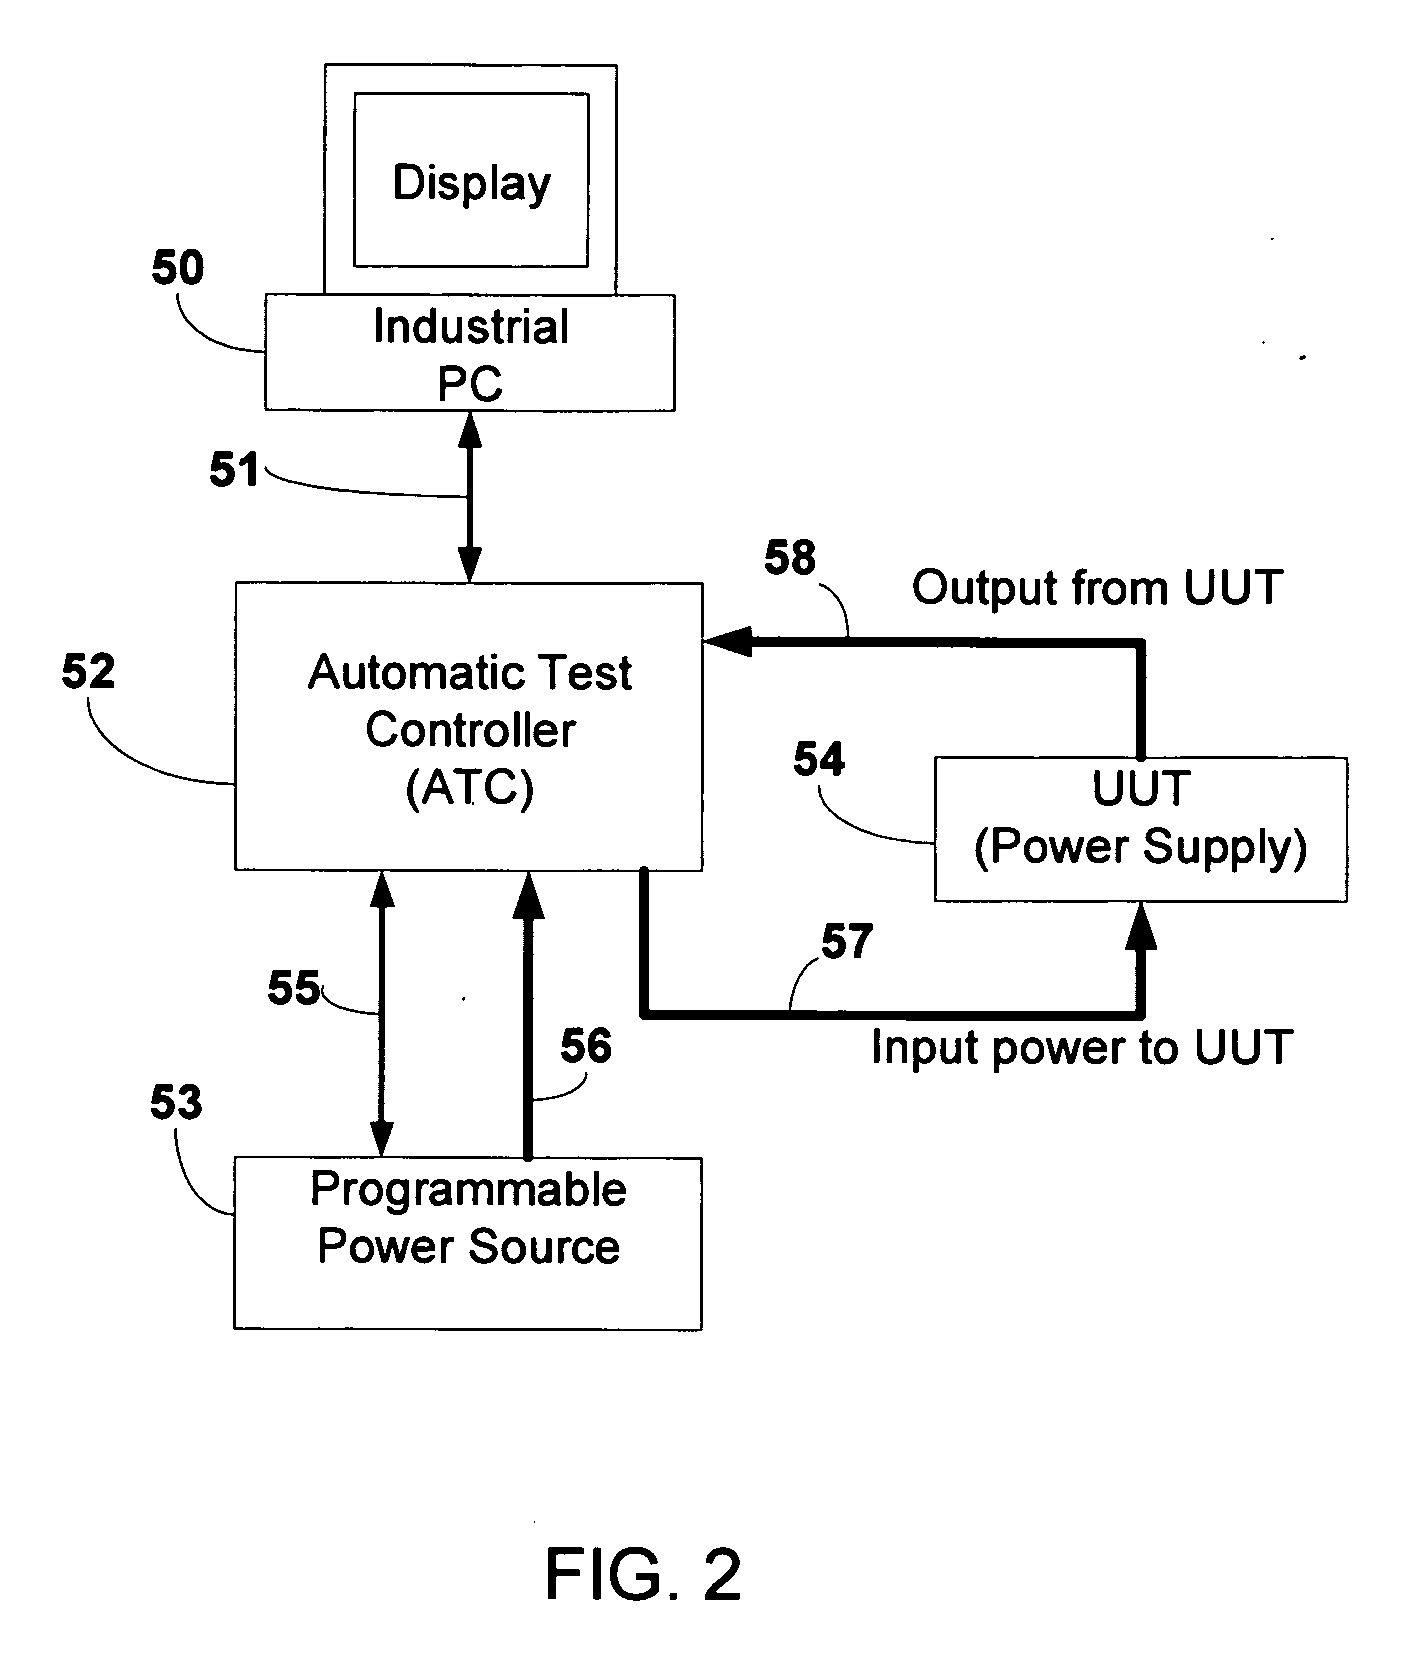 System architecture and apparatus for programmable automatic power supply testing